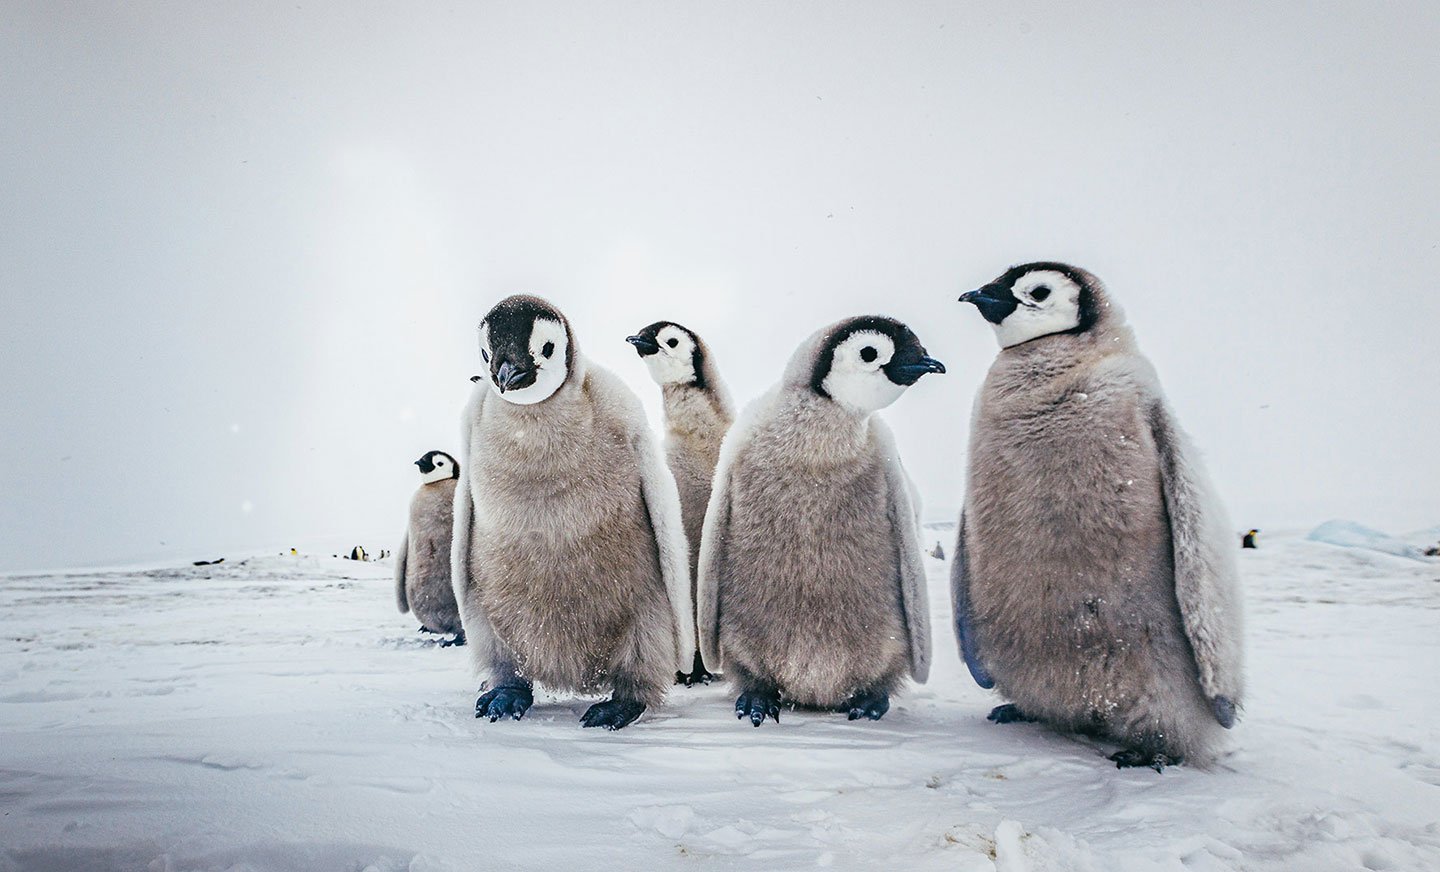 How to see penguins in Antarctica